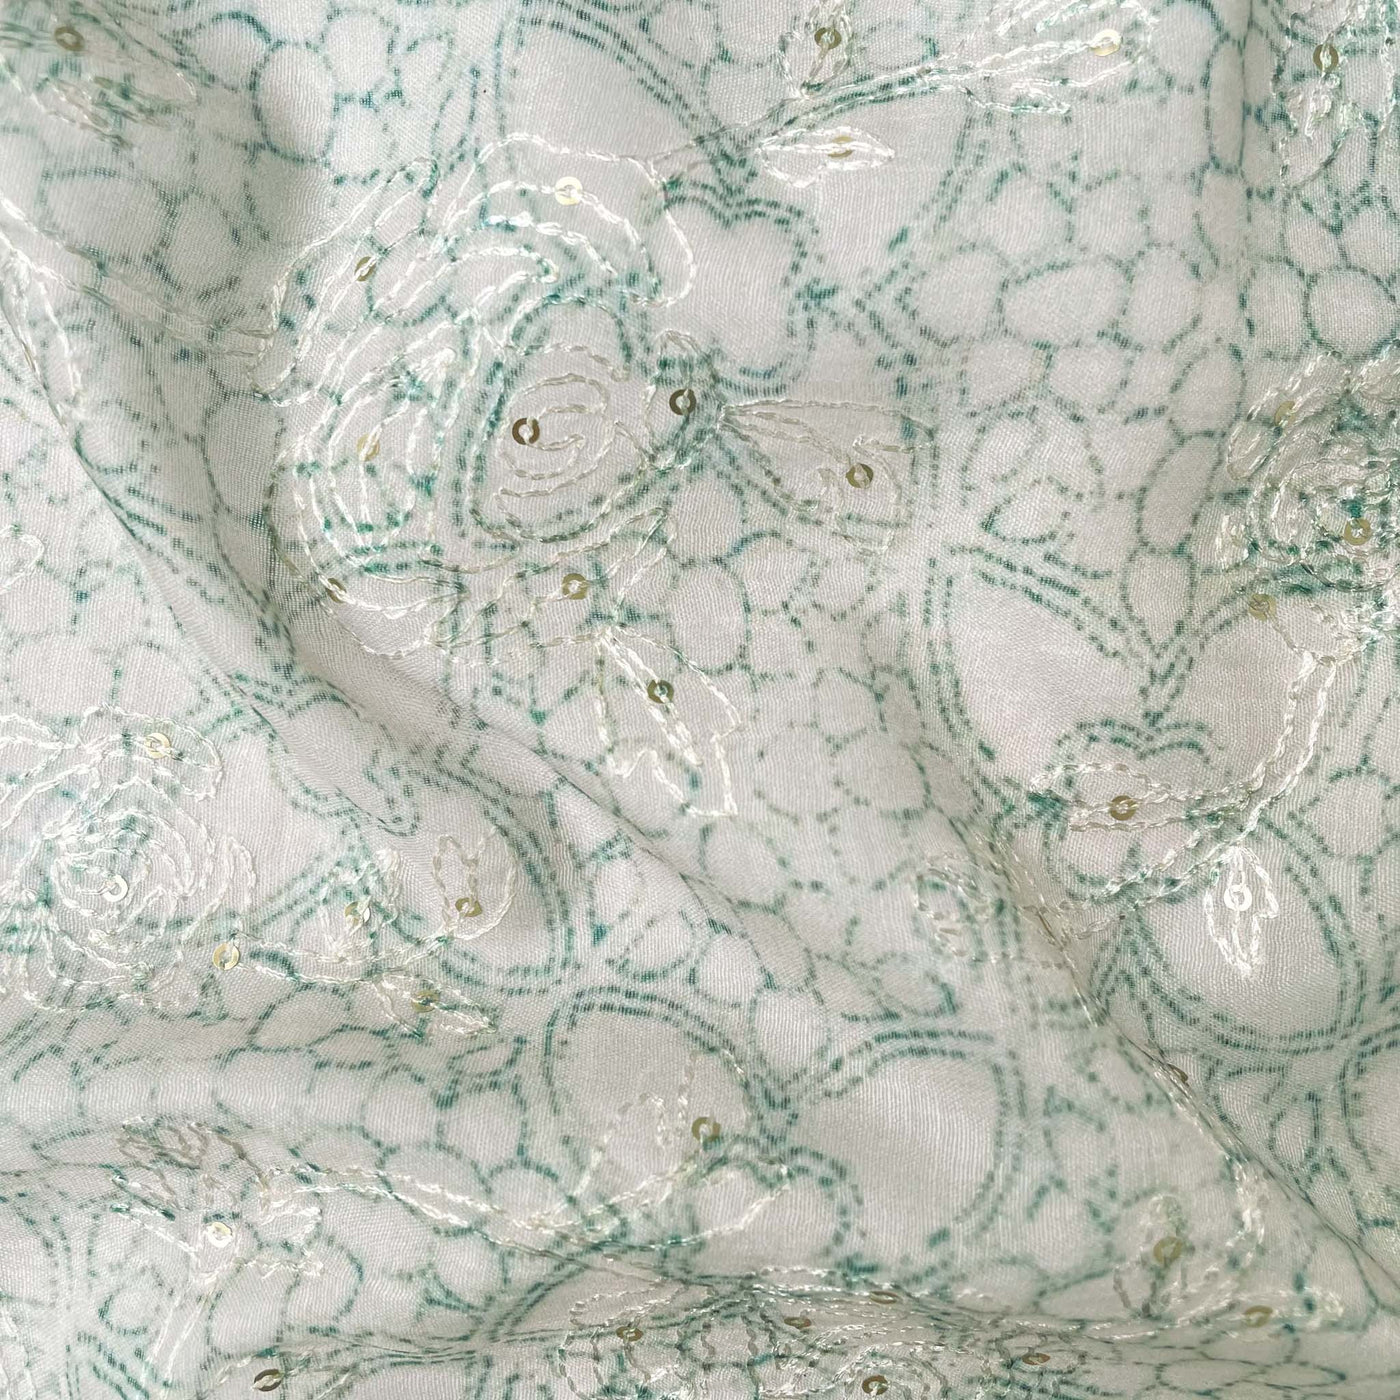 Digital Printed Embroidered Cotton Fabric Cut Piece (CUT PIECE) Dusty Ivory Green Abstract Floral Digital Printed Embroidered Cotton Fabric (Width 43 Inches)